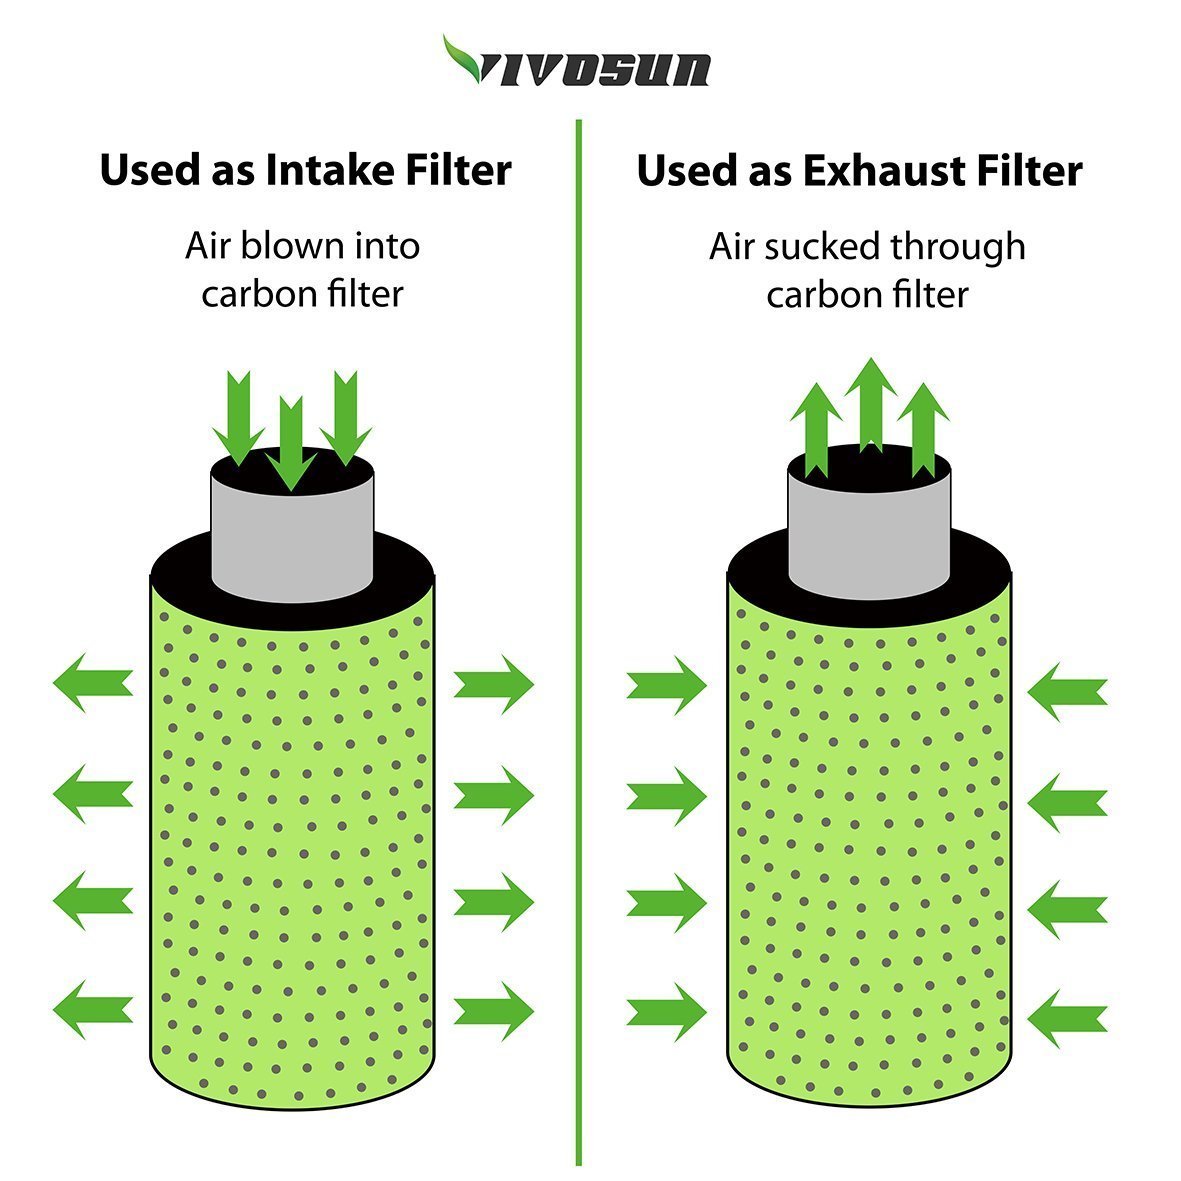 VIVOSUN 8 Inch Air Carbon Filter Odor Control with Australia Virgin Charcoal for Inline Fan, Grow Tent Odor Scrubber, Pre-filter Included, Reversible Flange 8" x 22" - $78.95